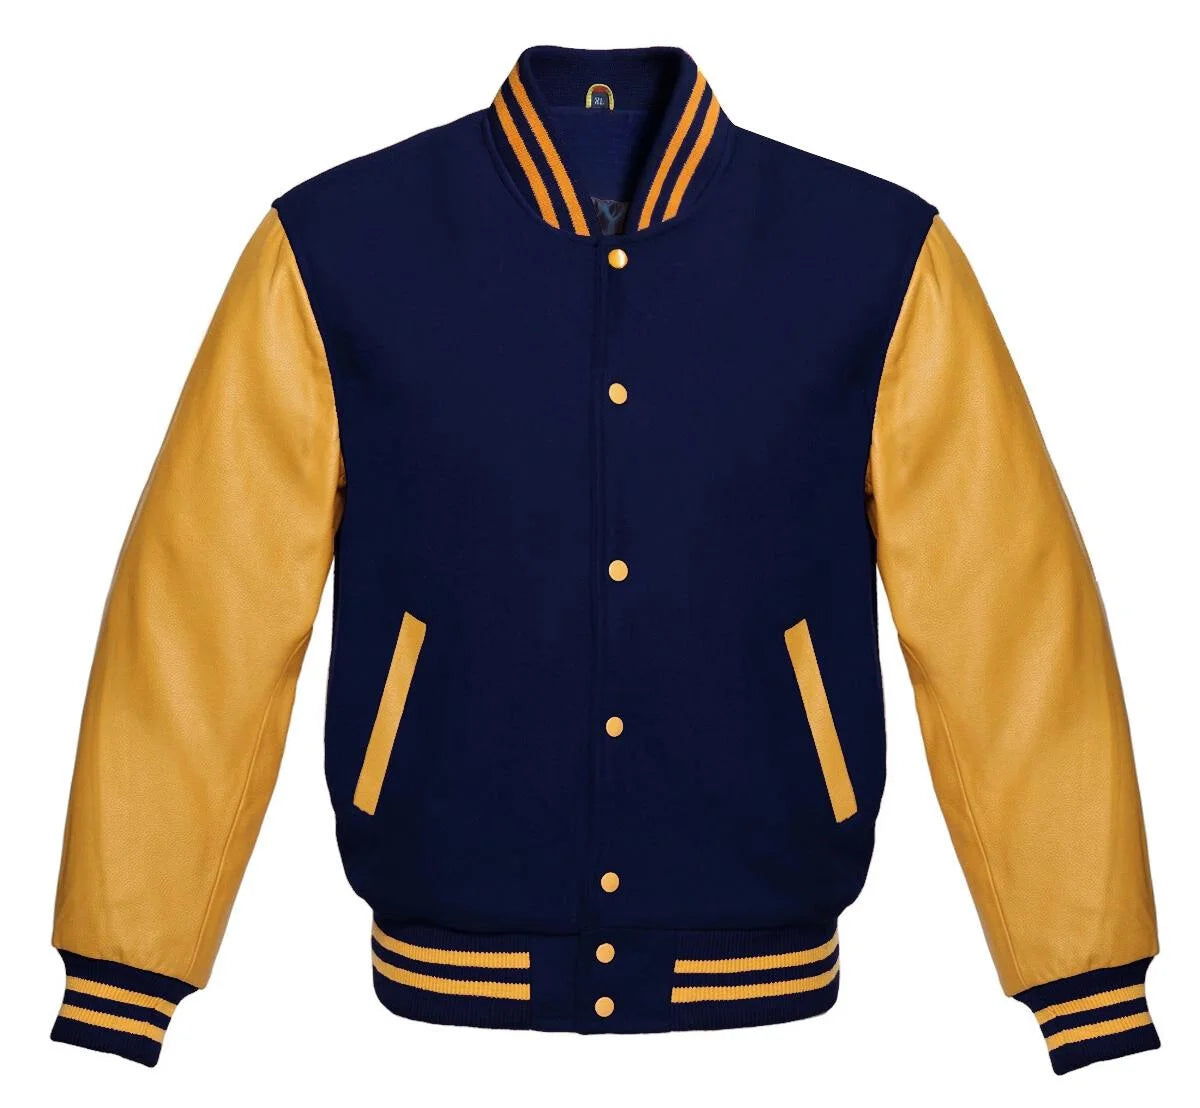 Gold and Navy Blue Letterman Jacket